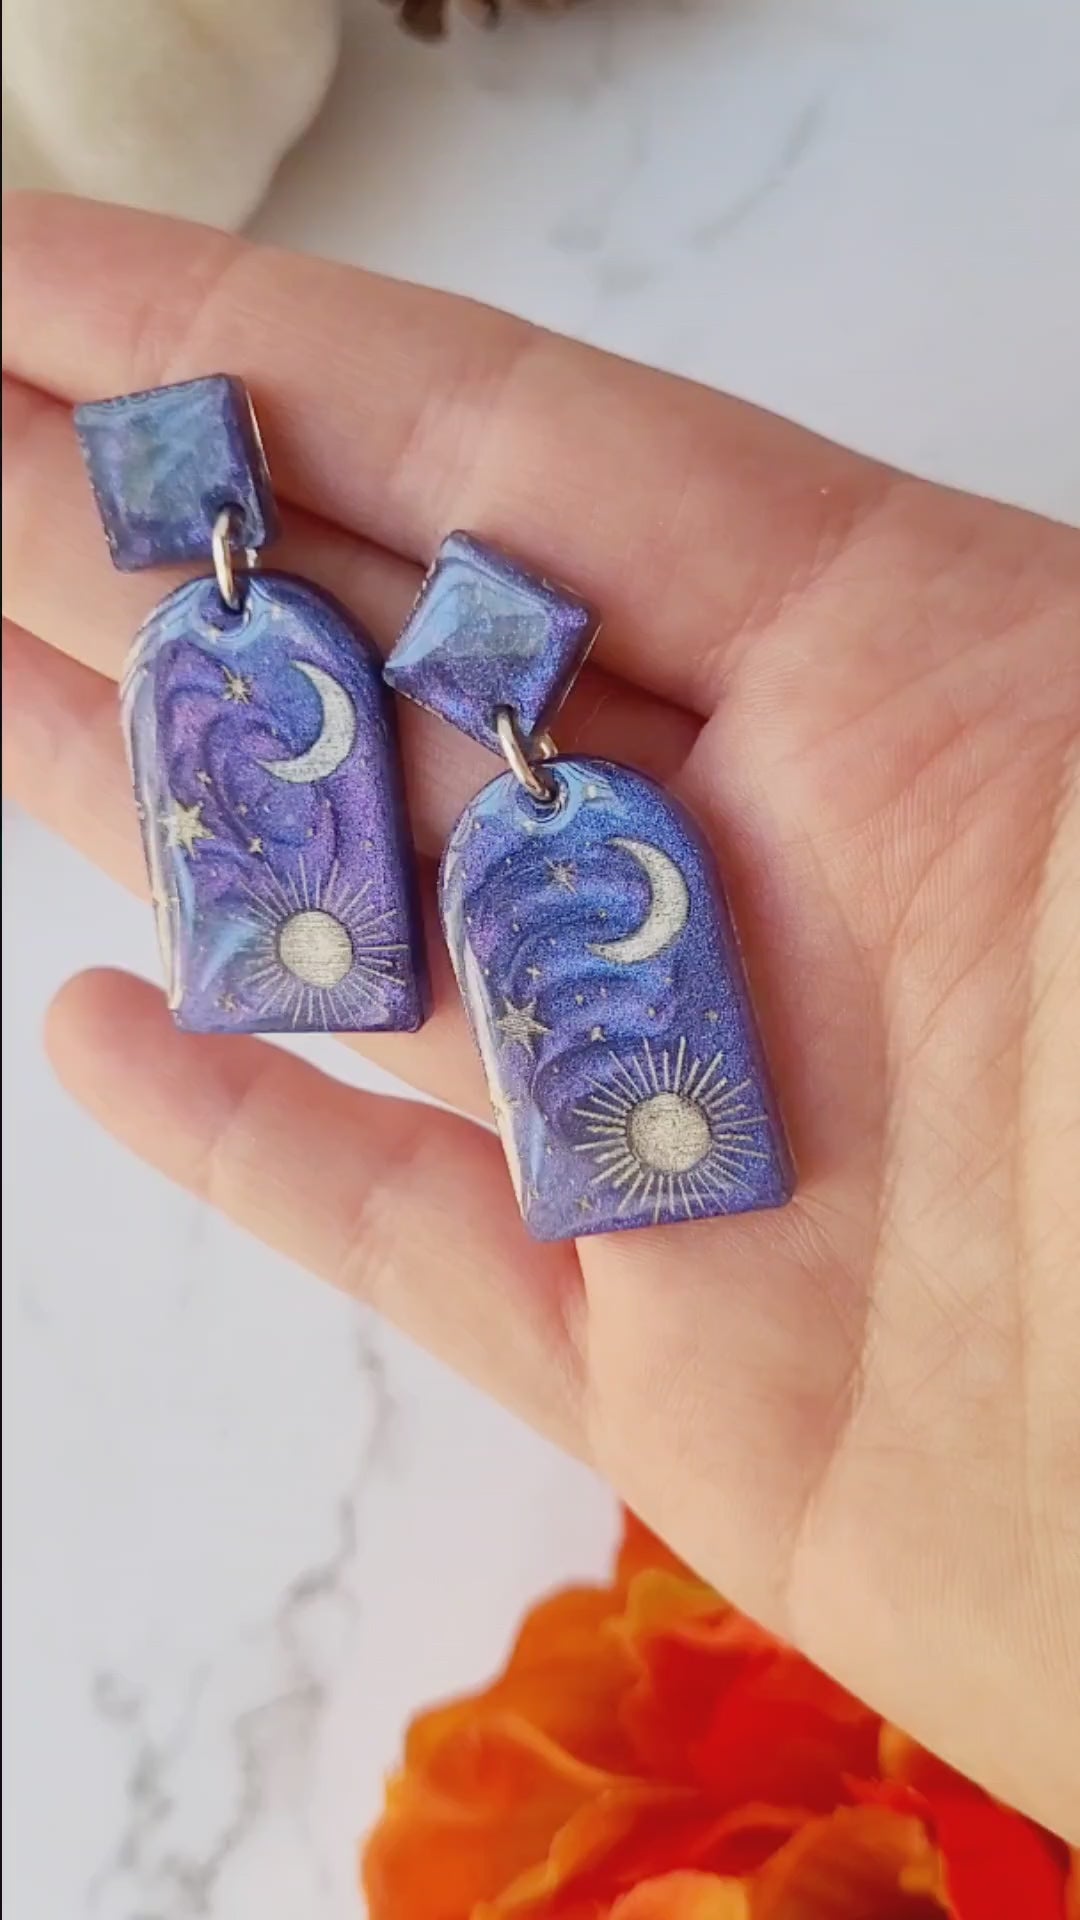 video close up of blue arch earrings with painted celestial details on a marble background.